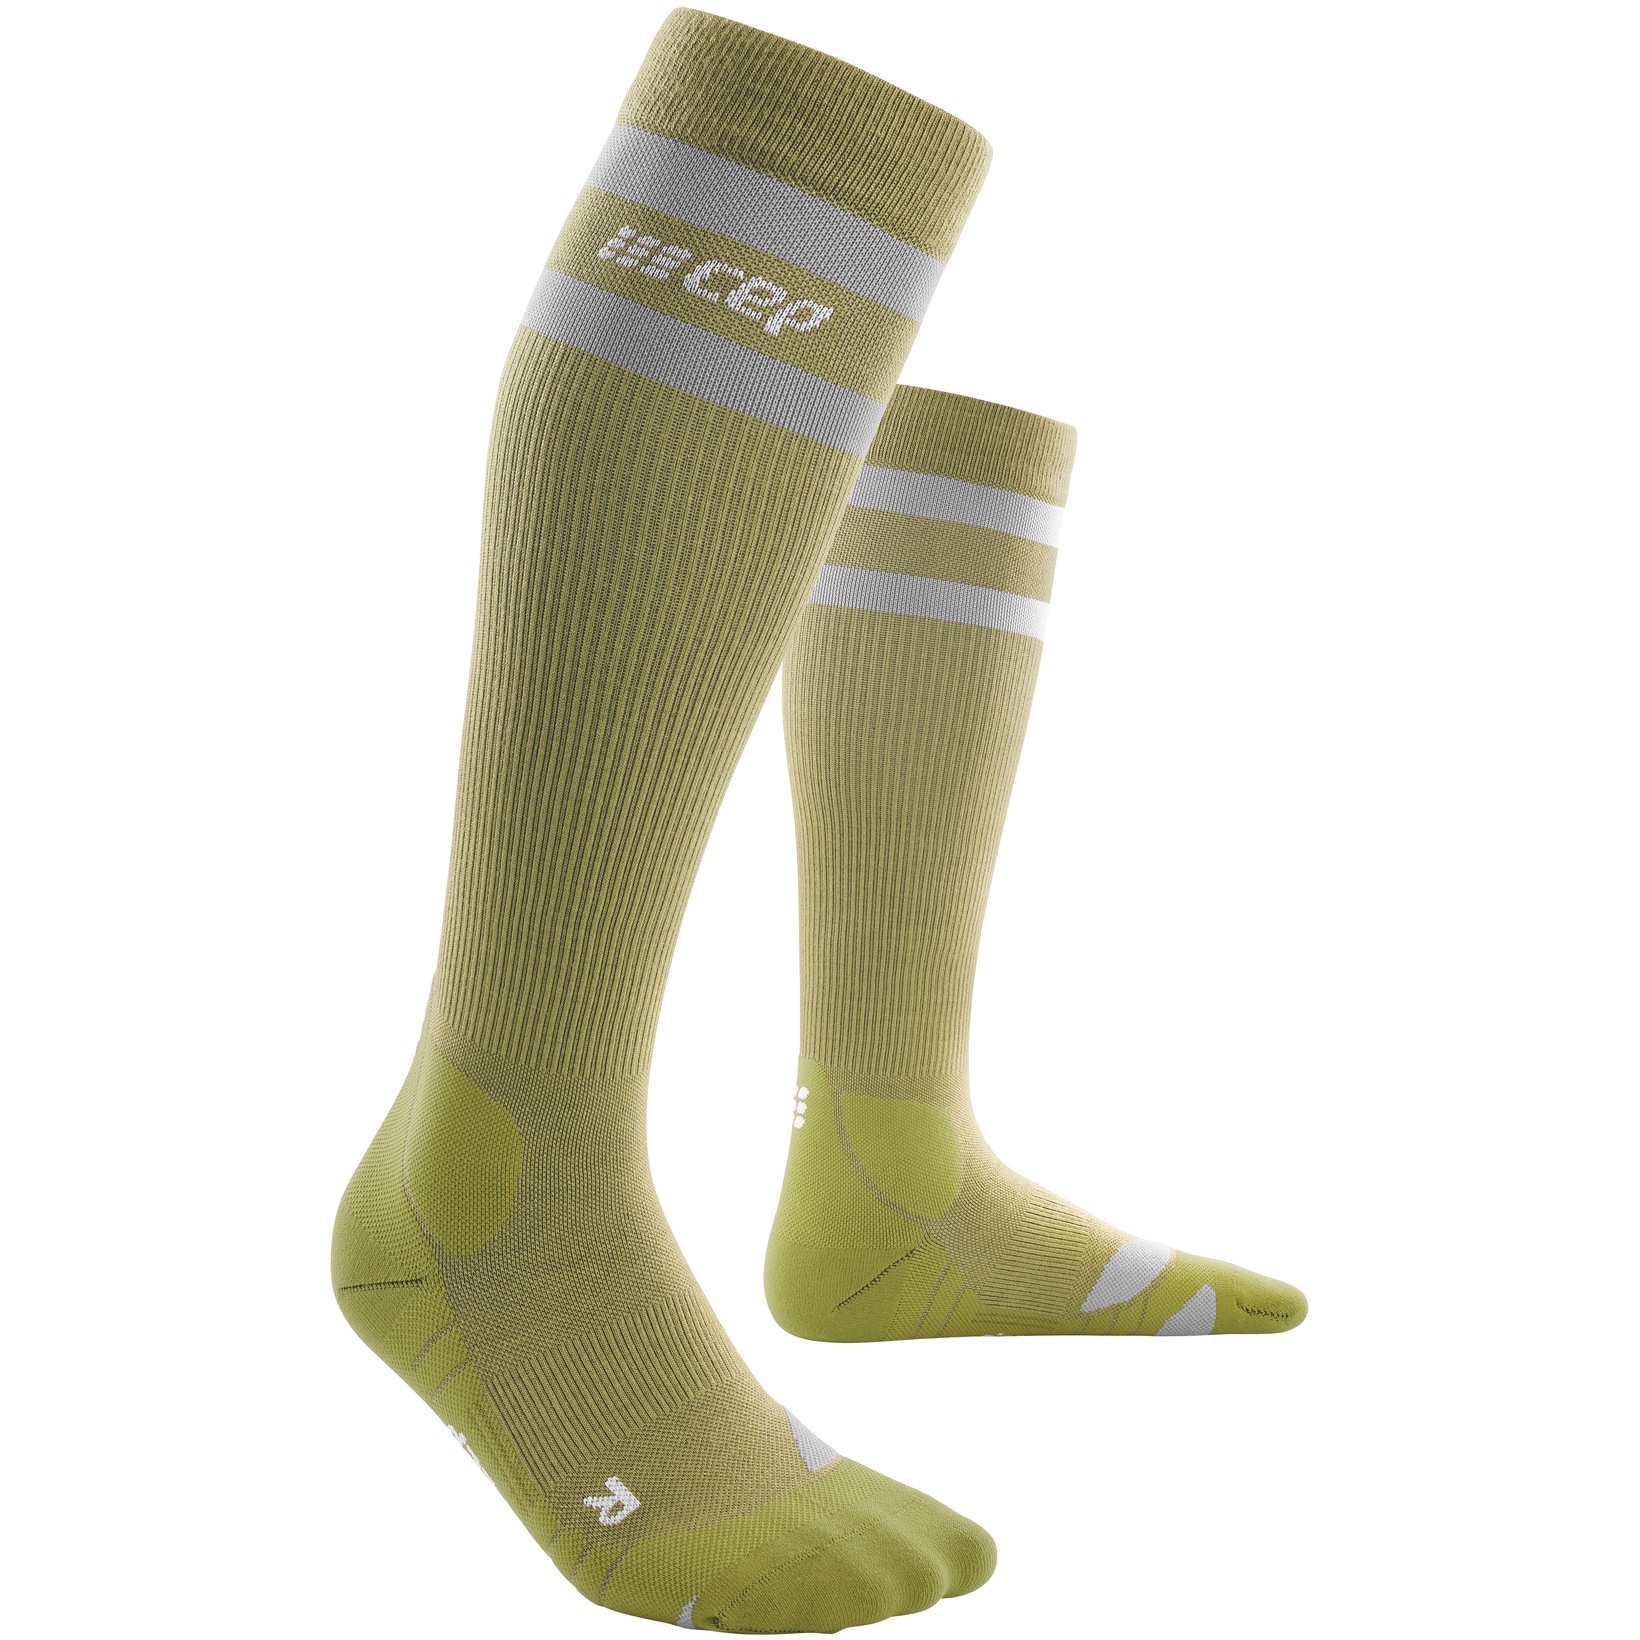 Image of CEP Hiking 80s Tall Compression Socks - olive/grey